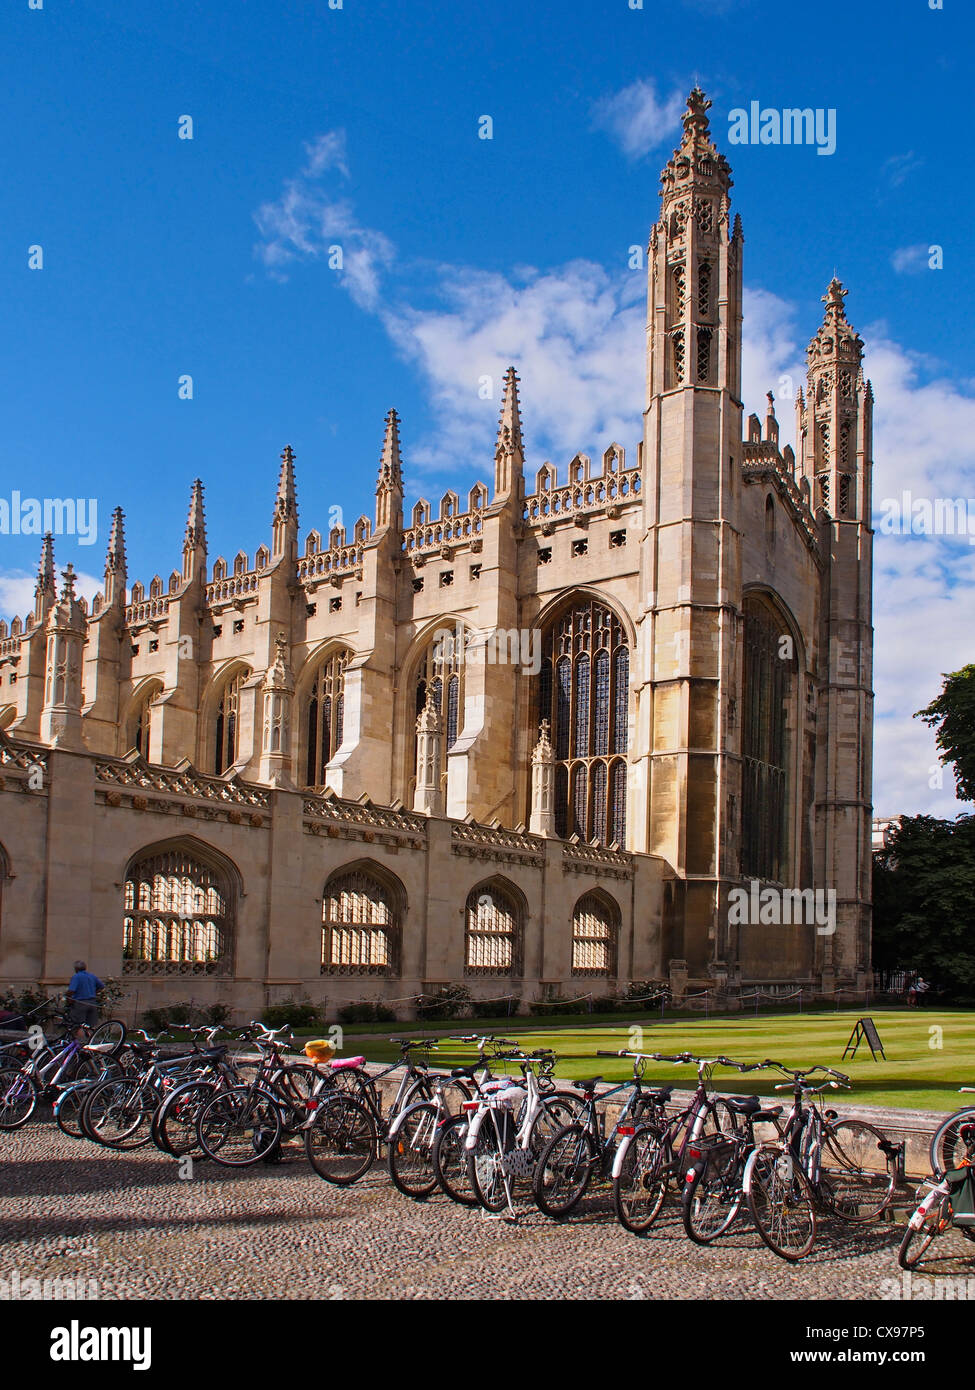 Portrait image of the front of Kings College Chapel Cambridge against blue autumn skies Stock Photo